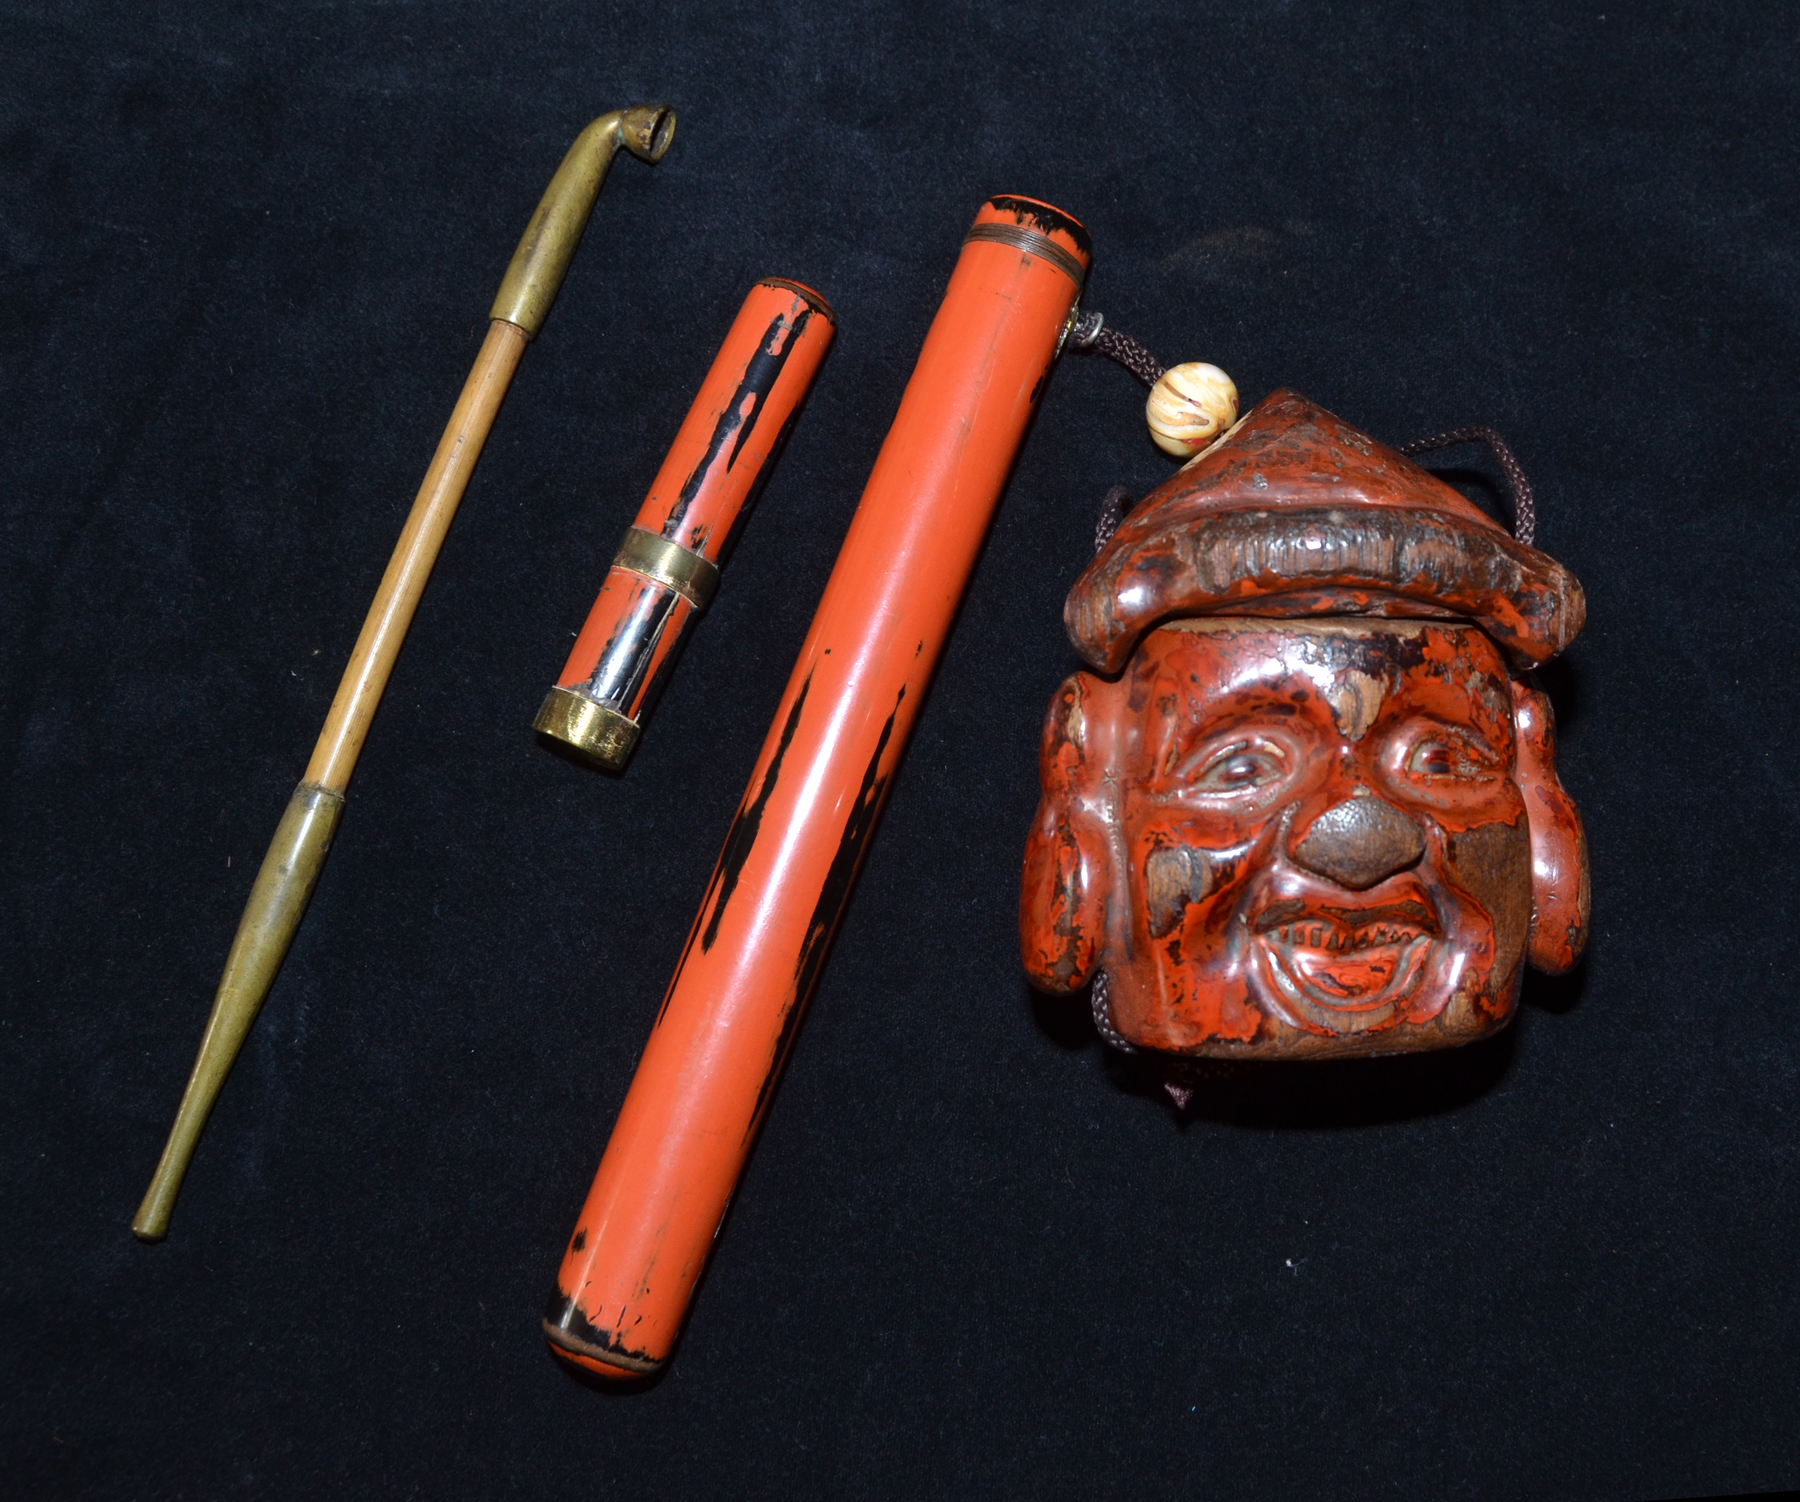 Japanese Antique Tobacco Case & Pipe with the Gods Daikoku and Ebisu